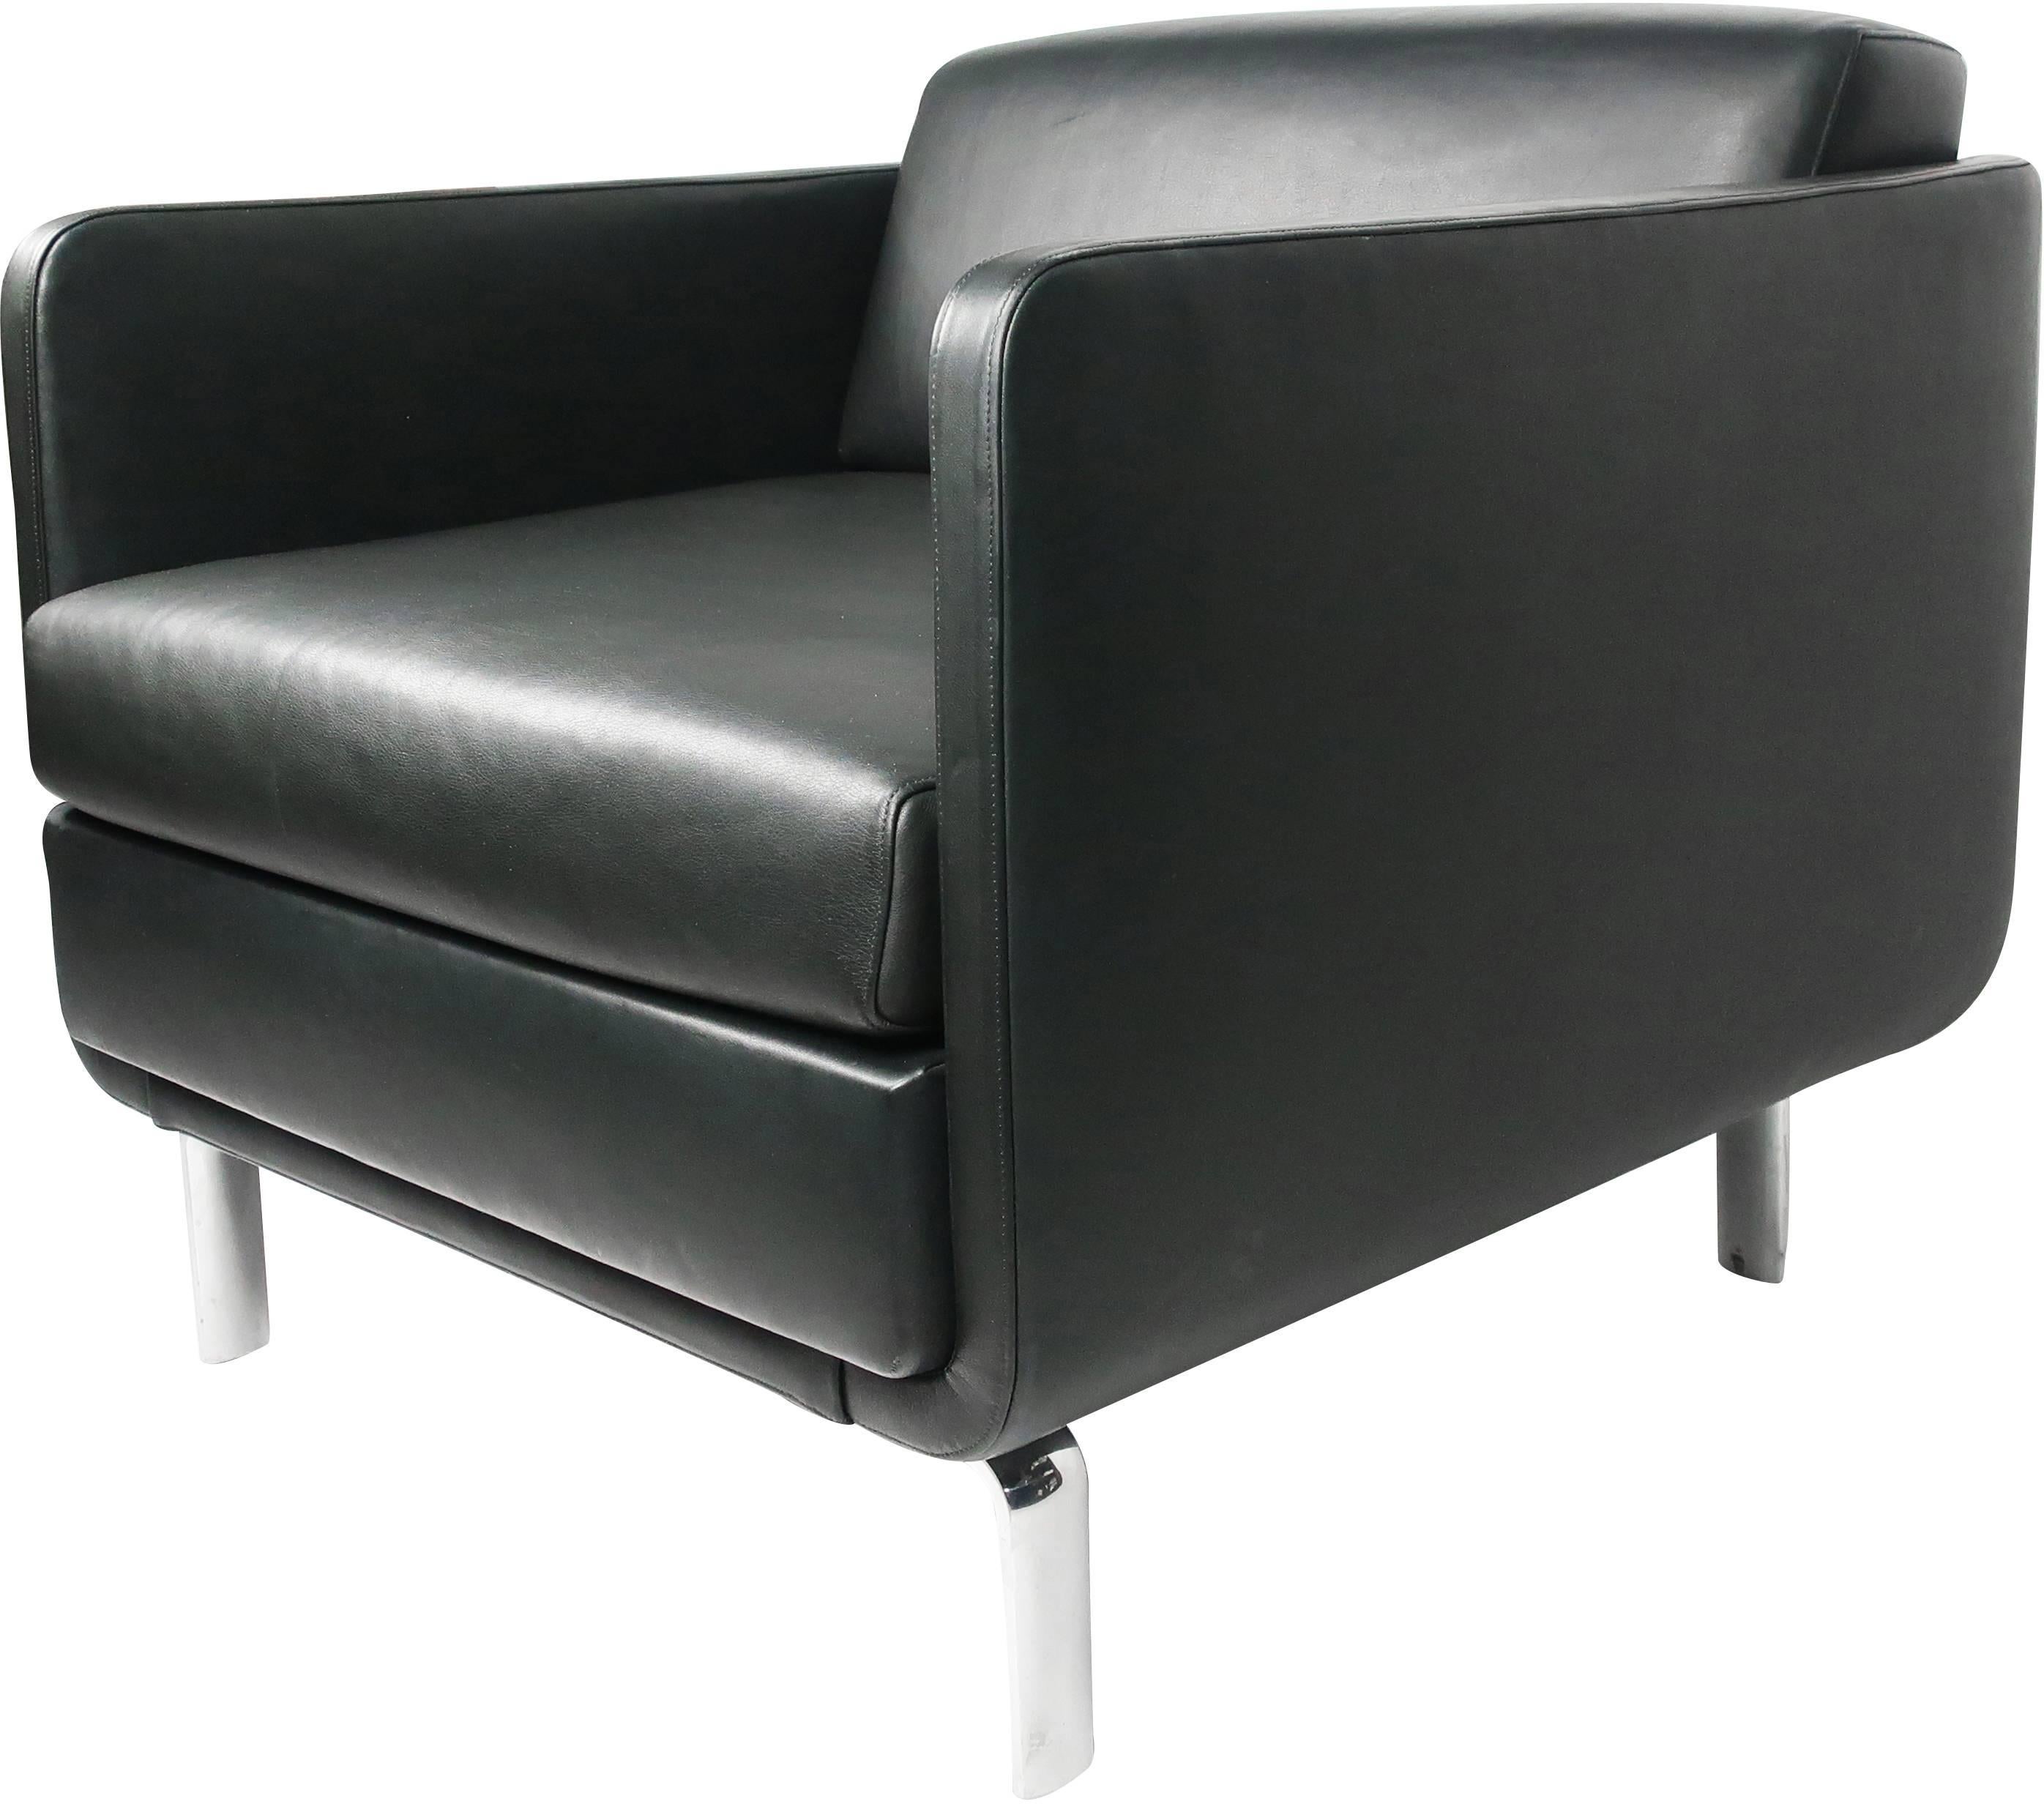 Designed by Arik Levy for Bernhardt Design with a wide seat, thin arms, and chrome legs, the Gaia 2202 arm chair is sophisticated, stylish, and comfortable. This black leather version was produced in 2010 and remains in great shape! Retails for over